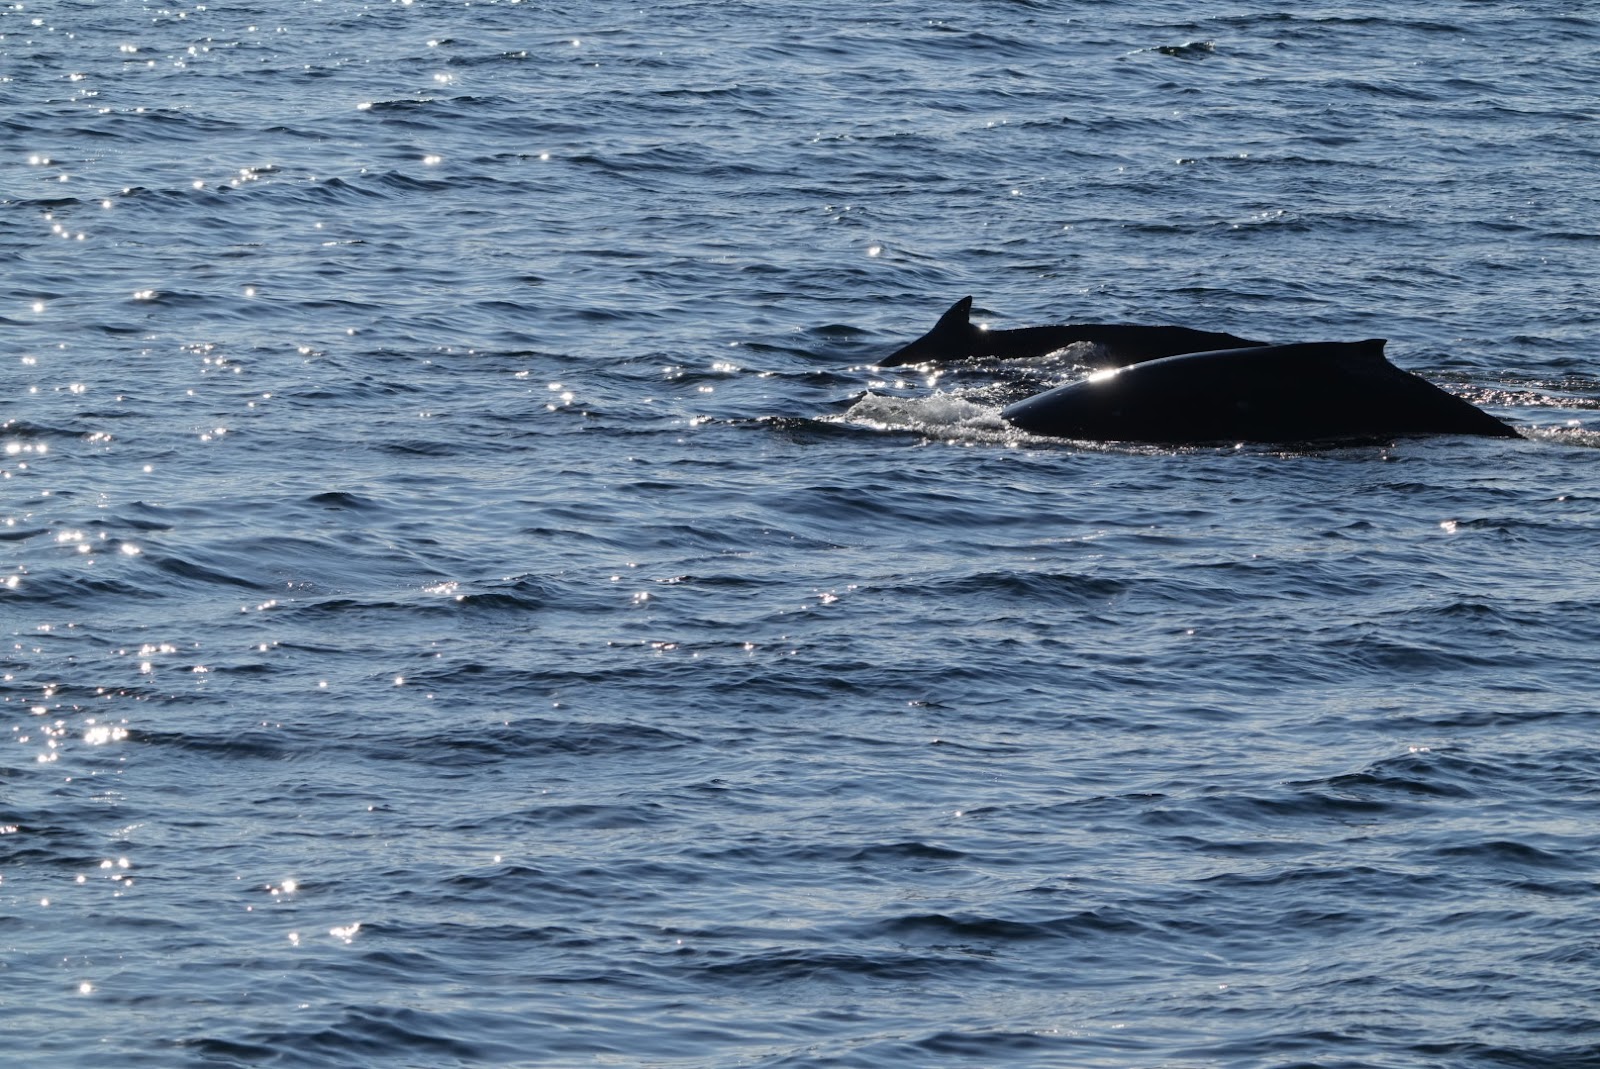 The backs of two whales can be seen side by side jutting out the surface of blue water.